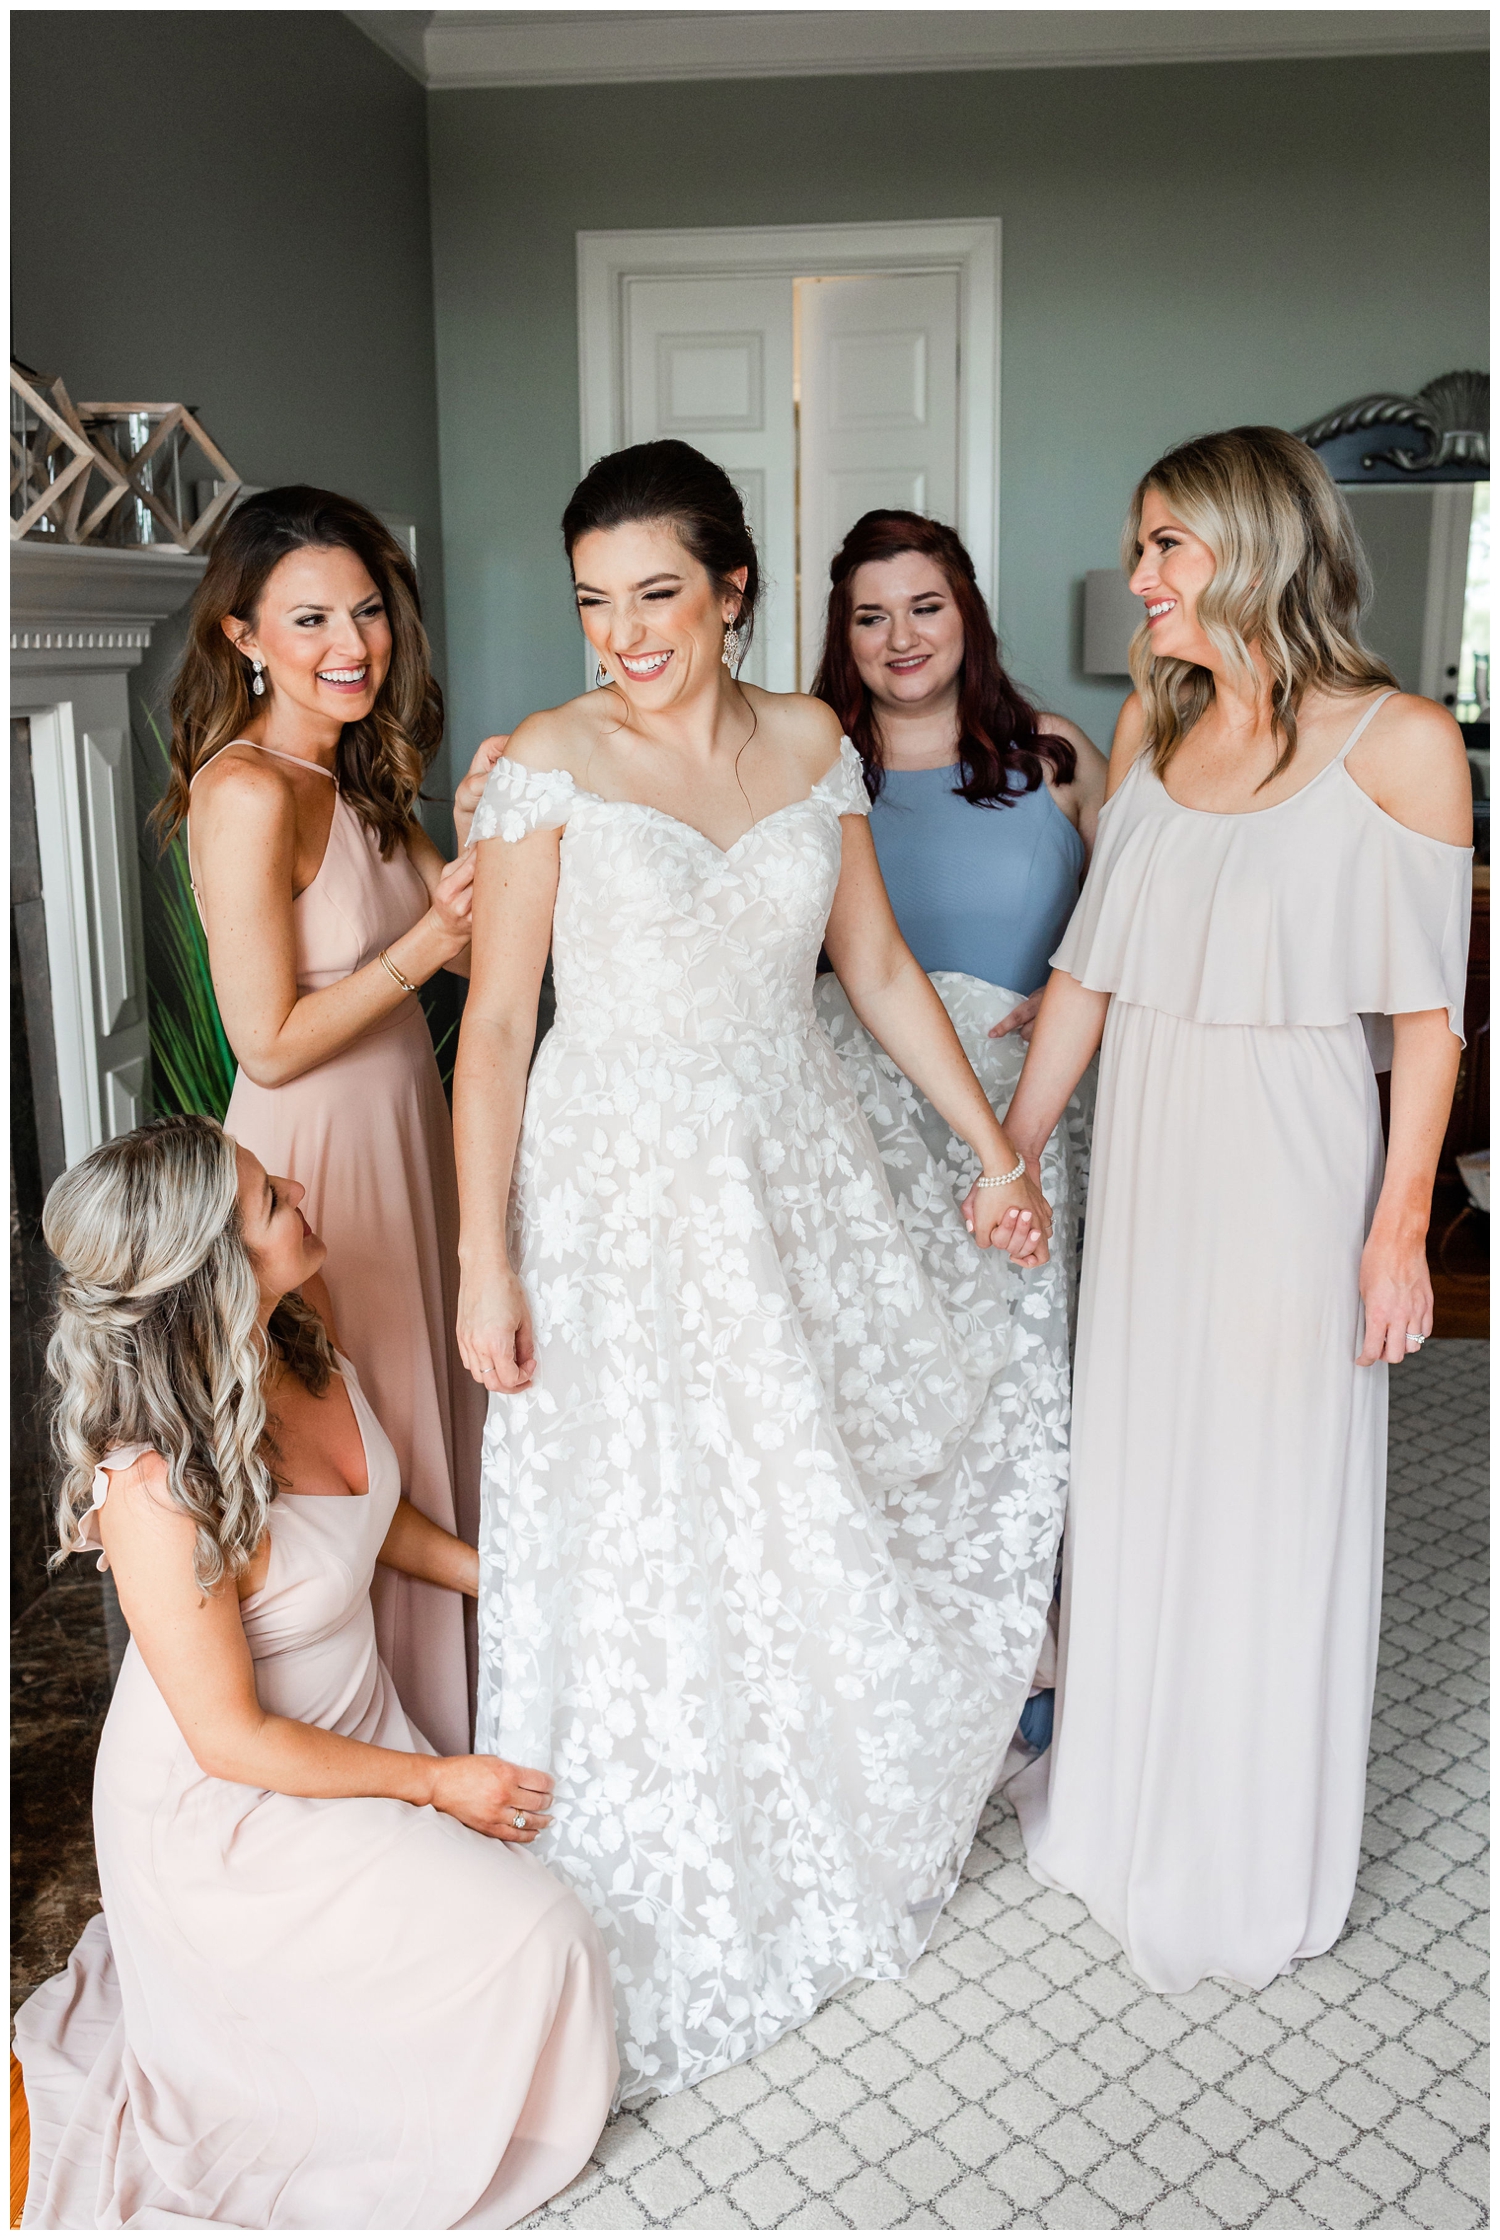 bride and bridesmaids getting ready at intimate Hilton Head wedding